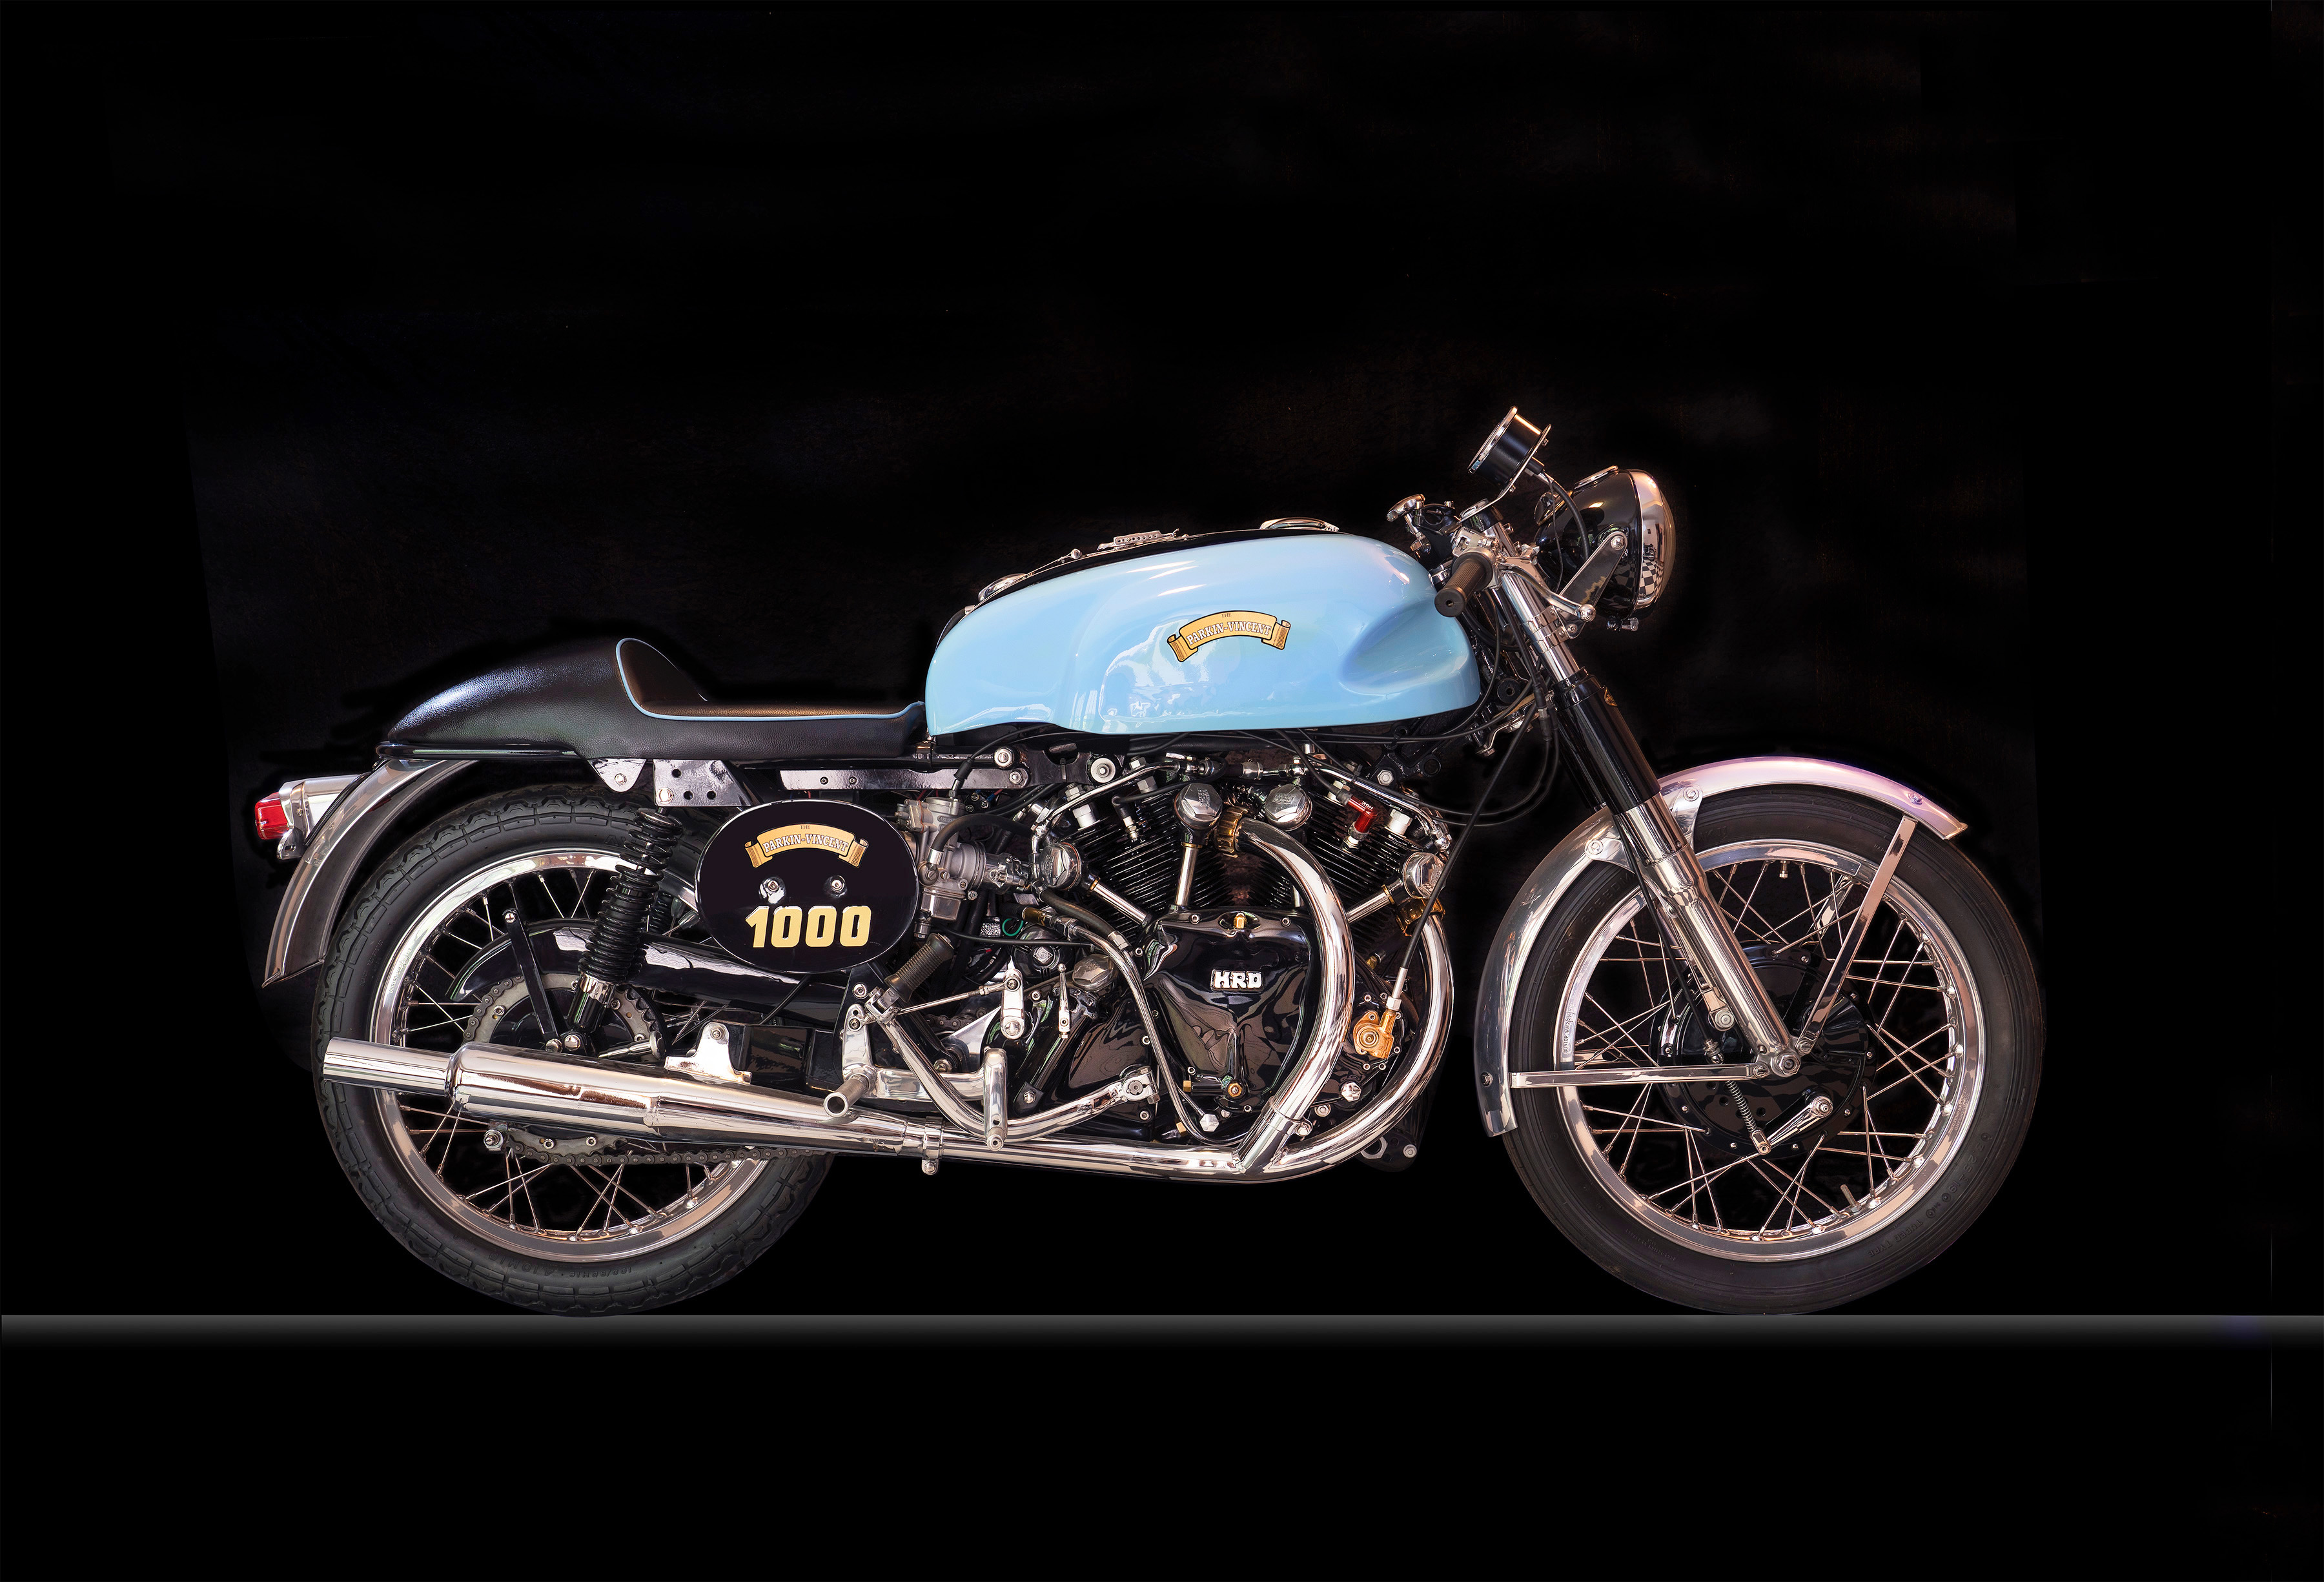 Motorcycles, Time Machines III: The Age of Elegance, ClassicCars.com Journal